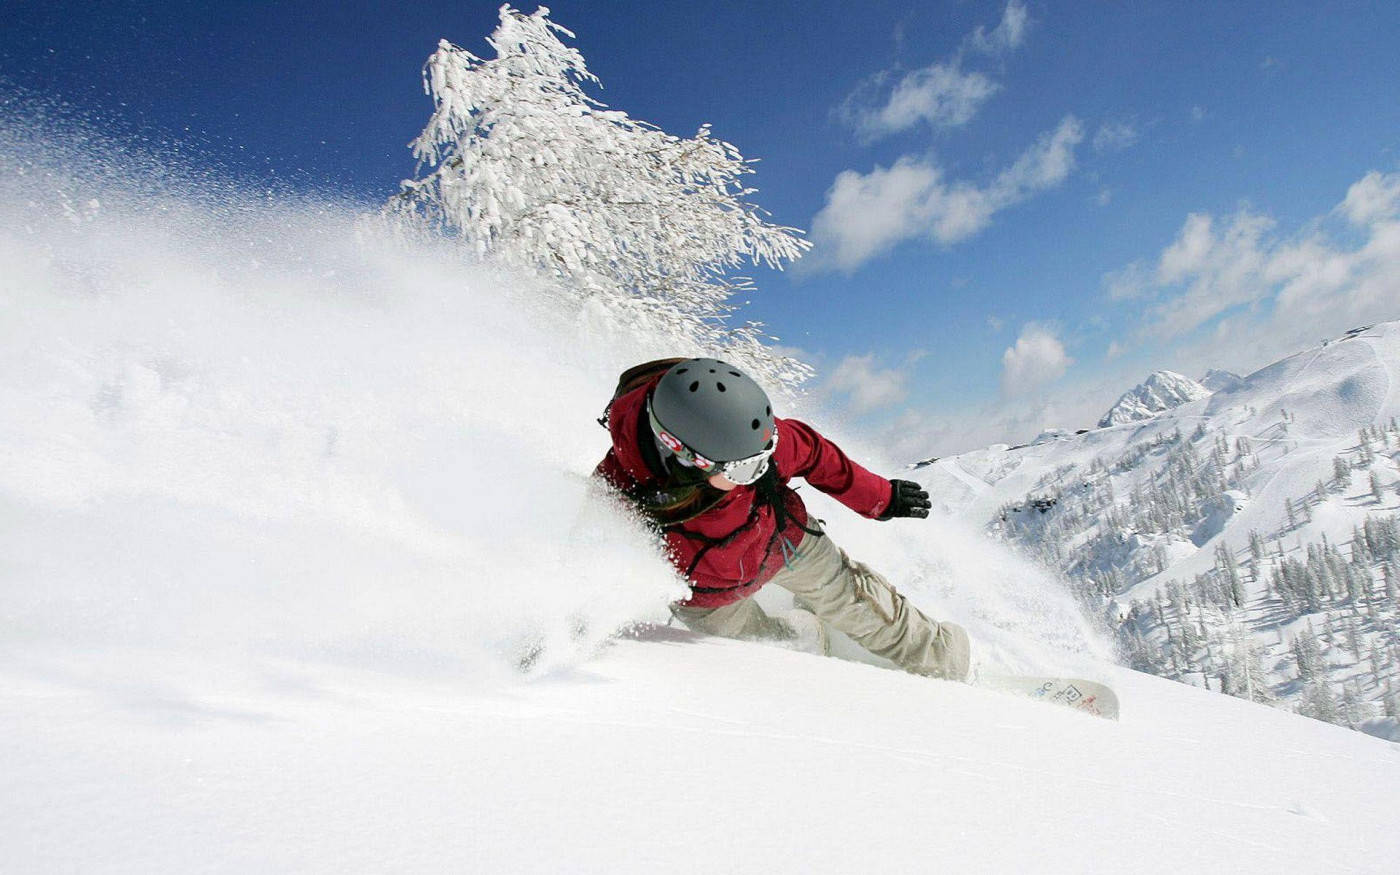 Man In Red With Snowboard Dashing Through Snow Background